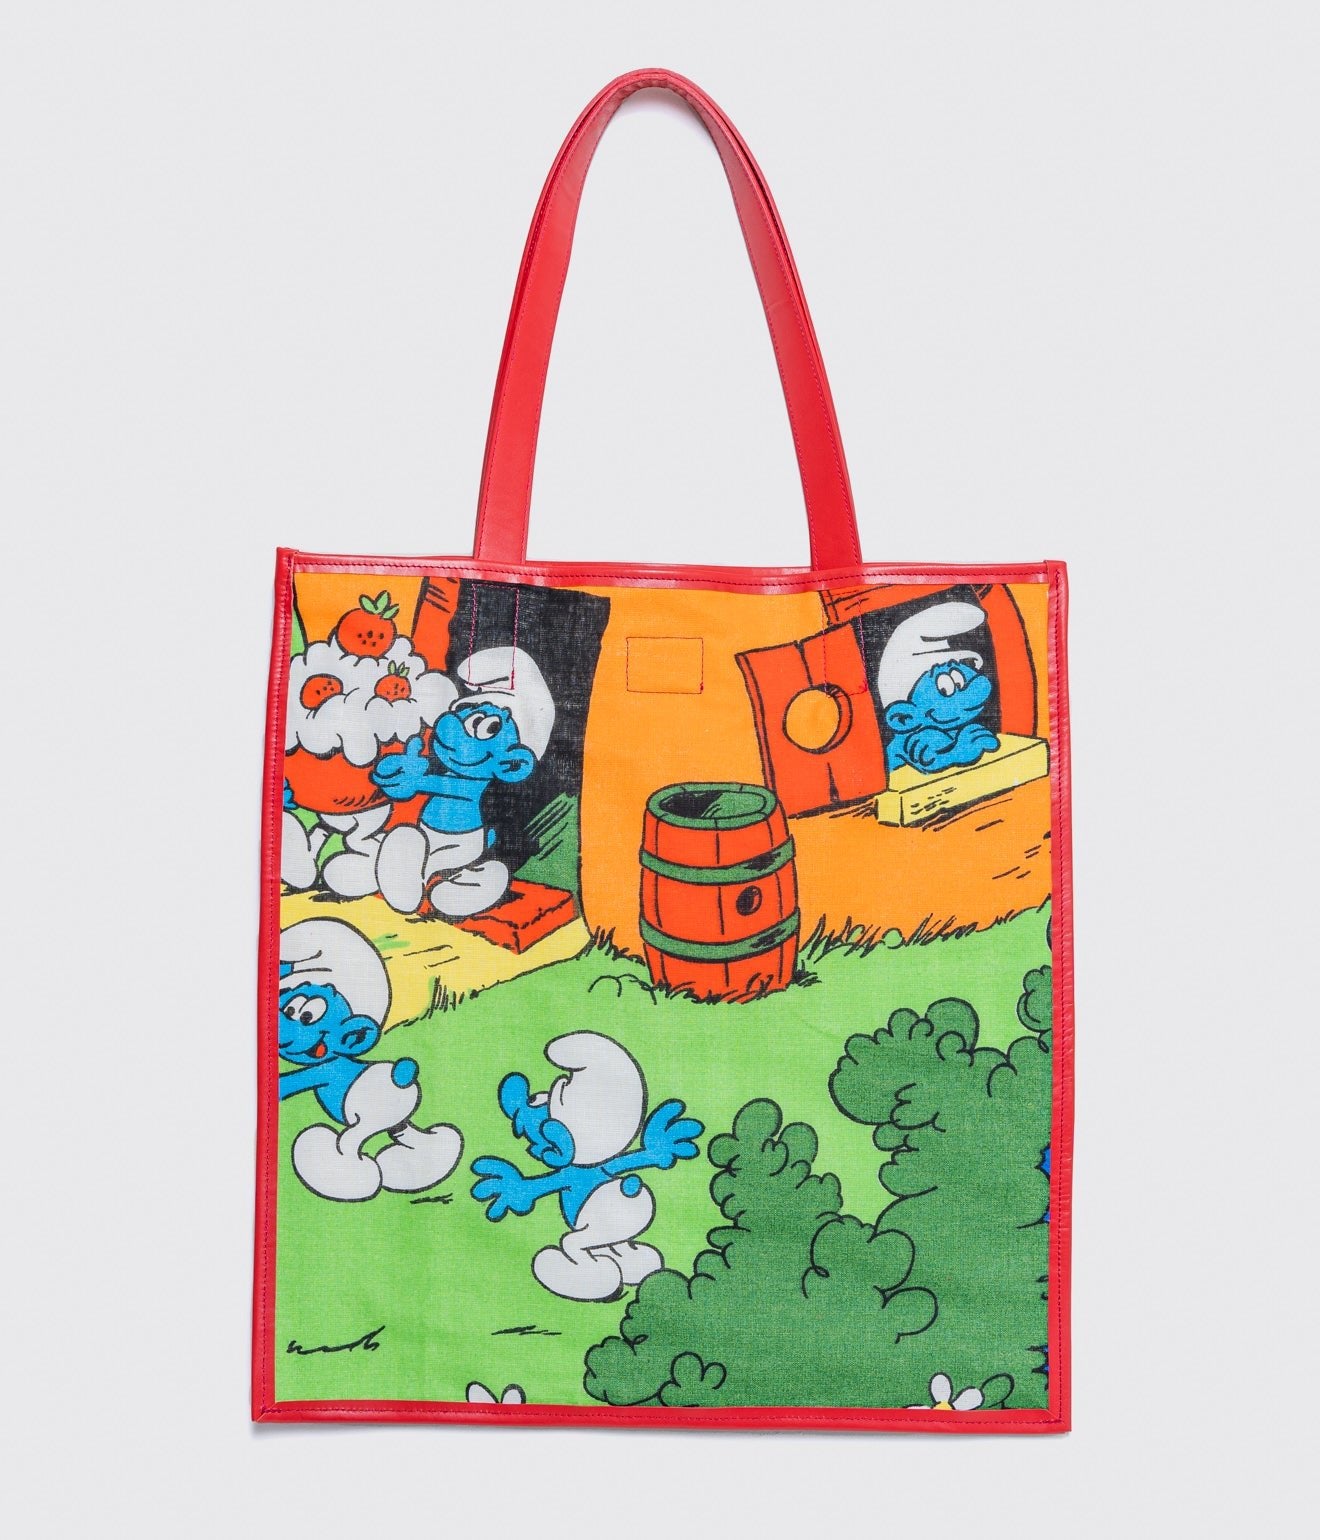 WEAREALLANIMALS UPCYCLE ”Piping Flat Tote -Vintage Smurf Fabric-" #4 - WEAREALLANIMALS